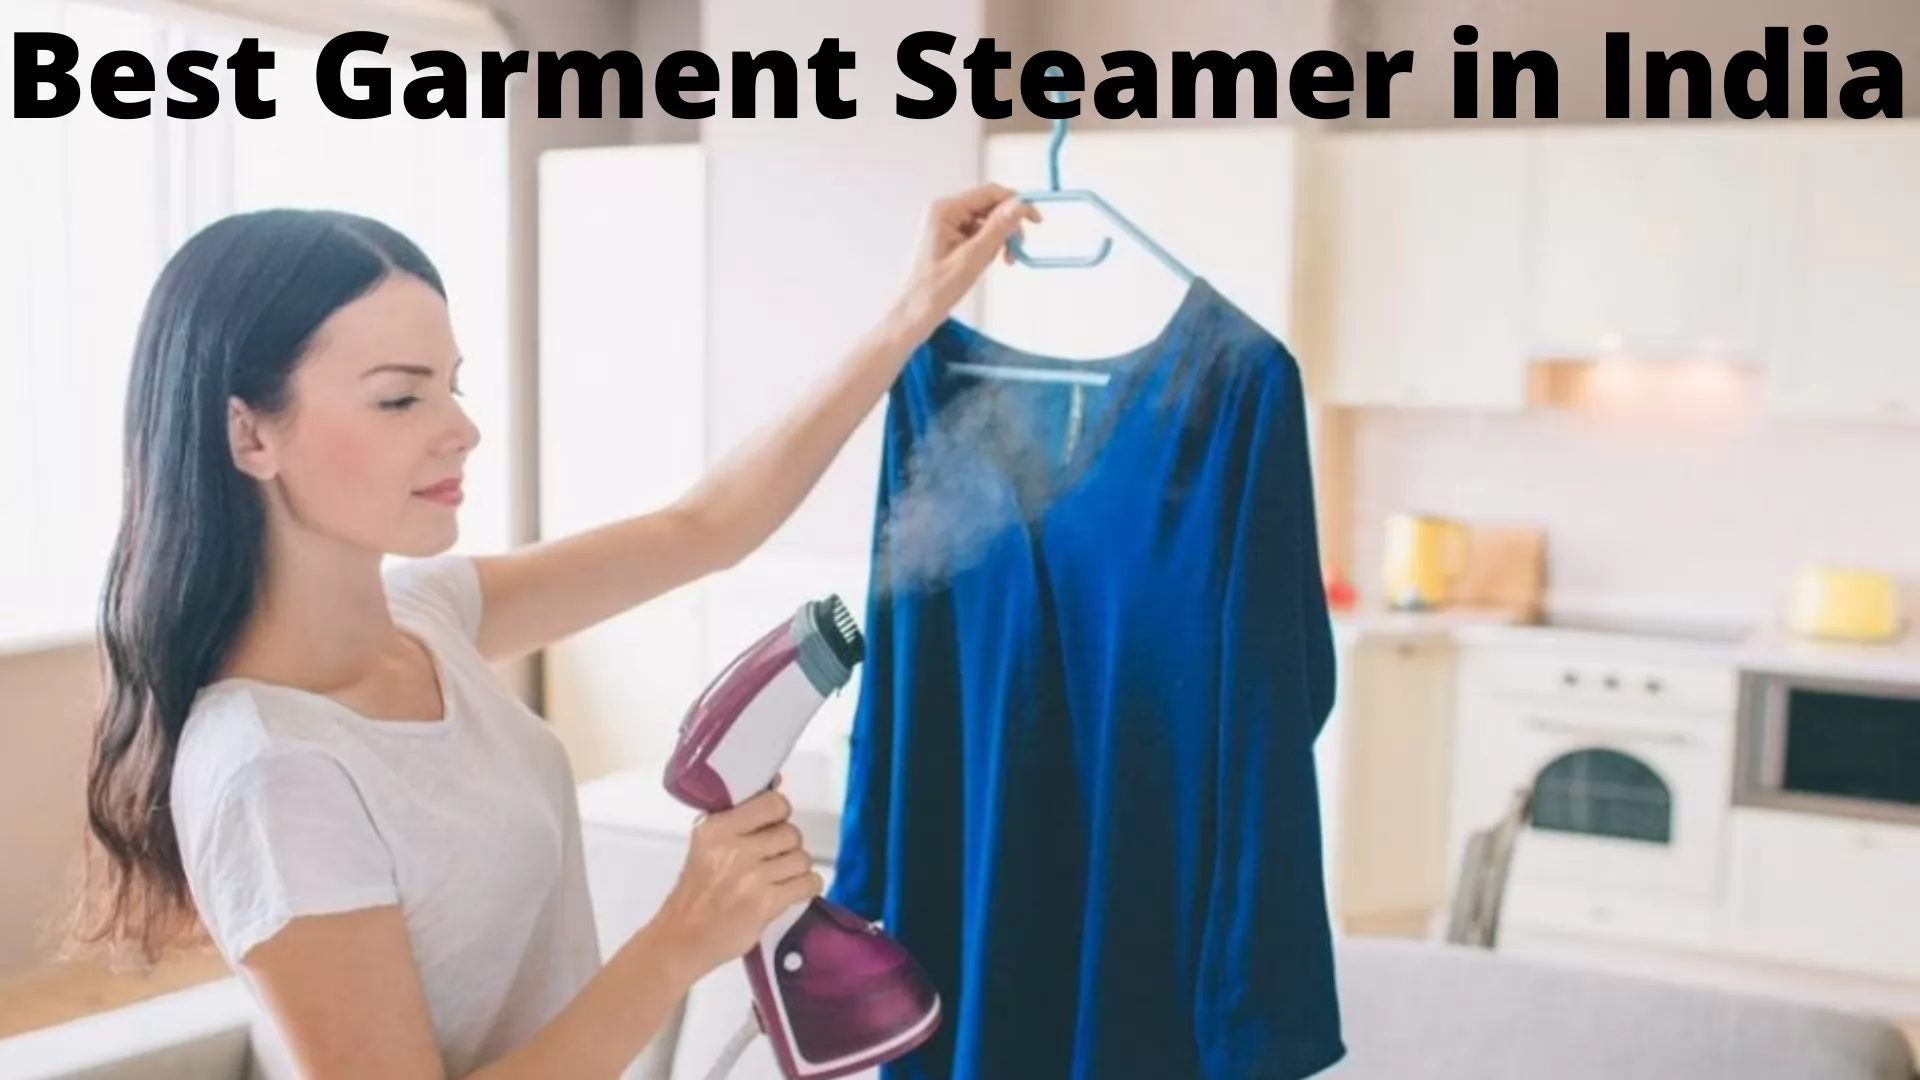 Best Garment Steamer in India: Features, Prices, and More